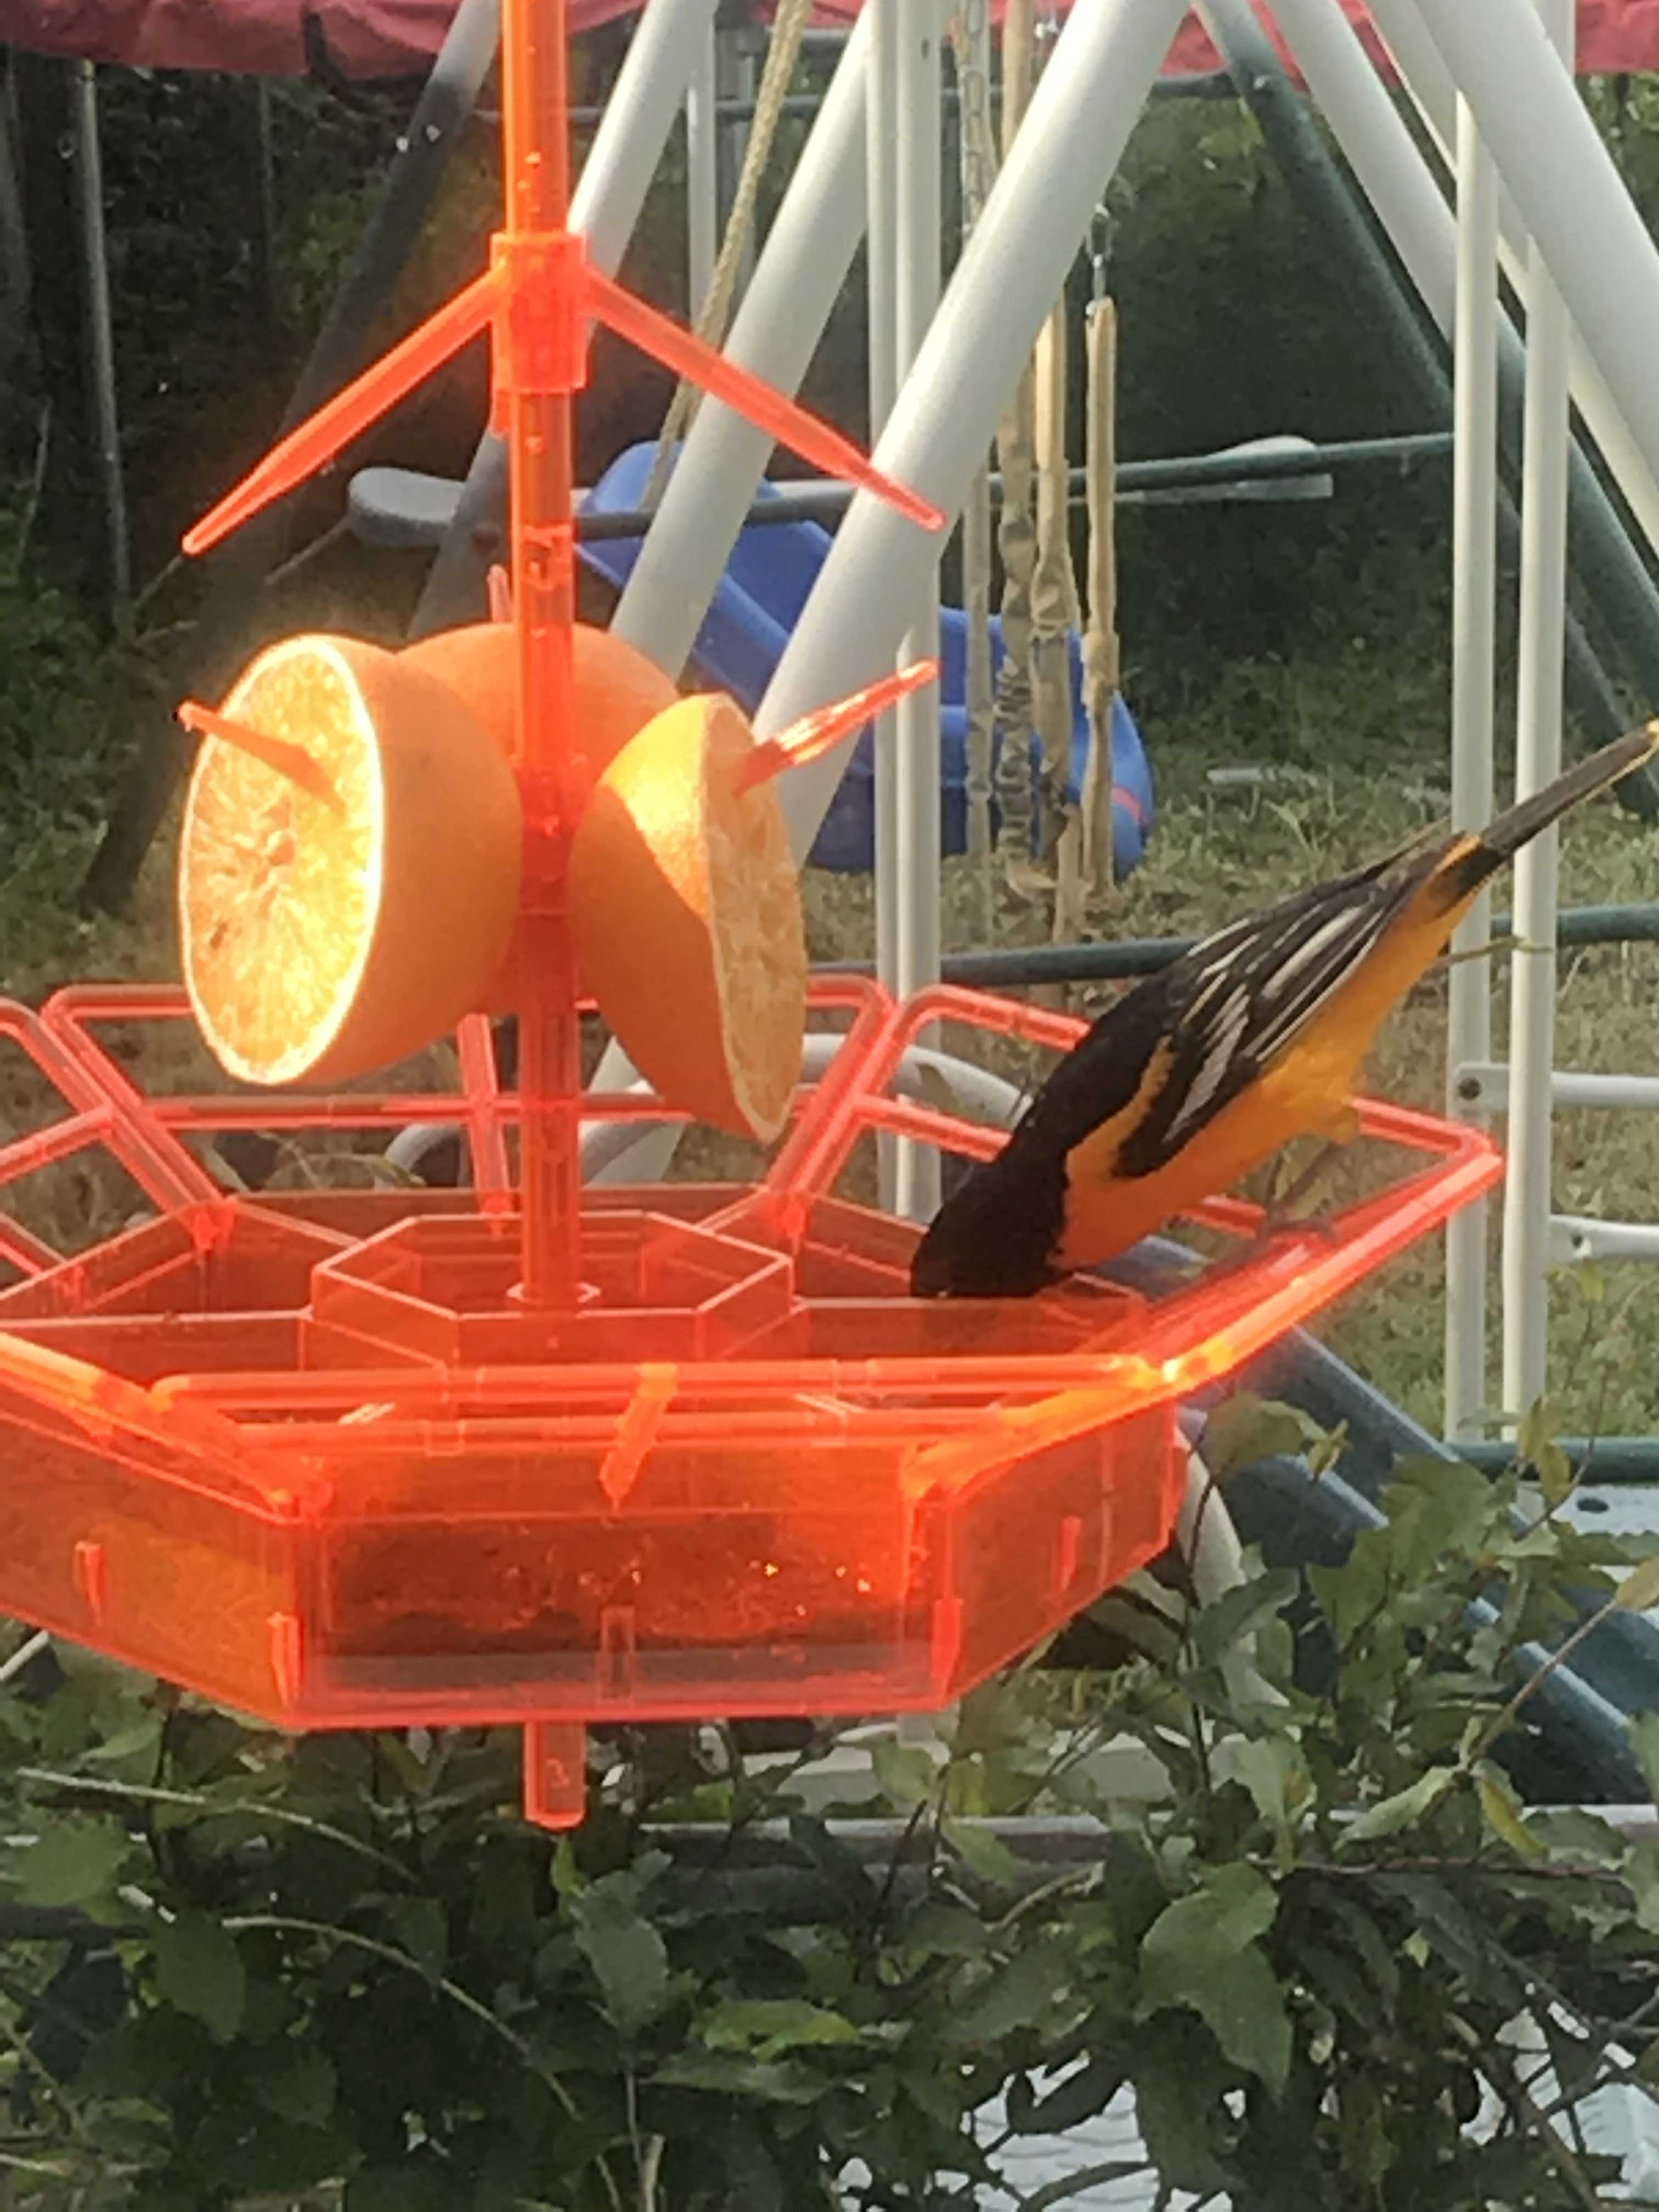 The Orioles and More Feeder